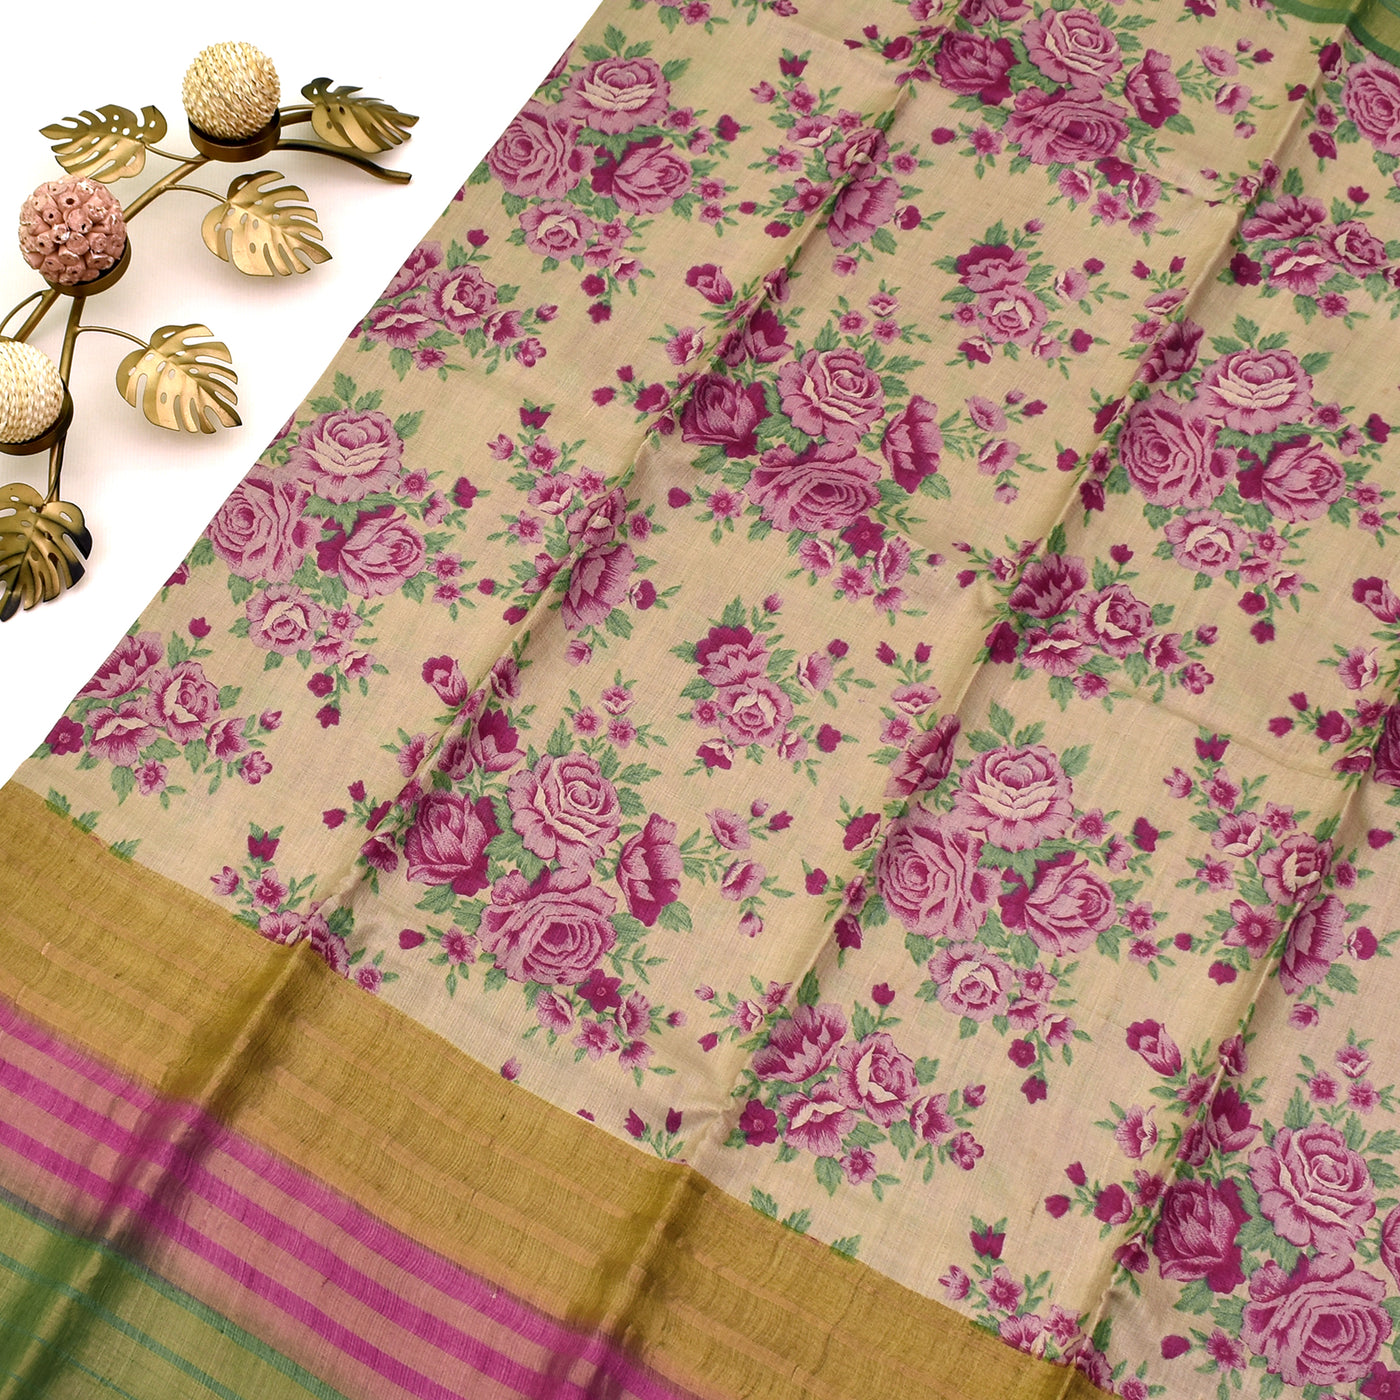 Off White Tussar Silk Saree with floral printed design